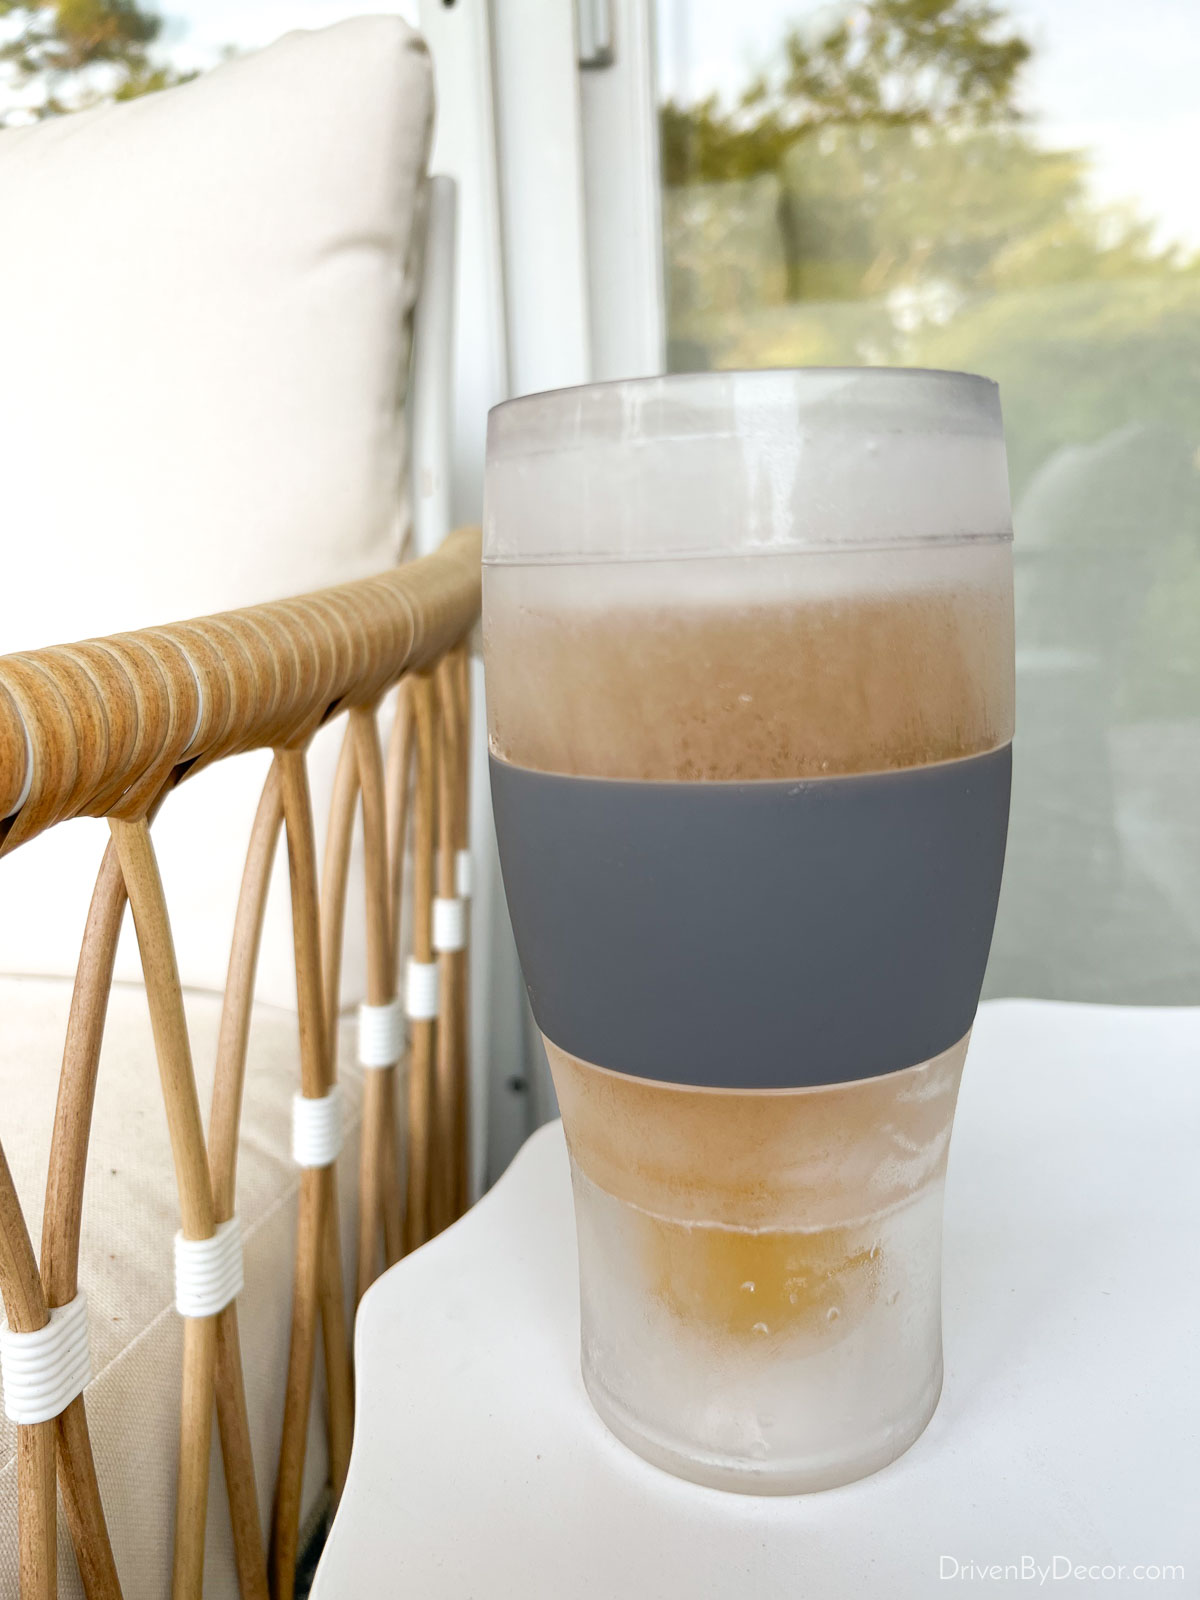 Gel lined beer glass that keeps your beer cold - great Father's Day gift!